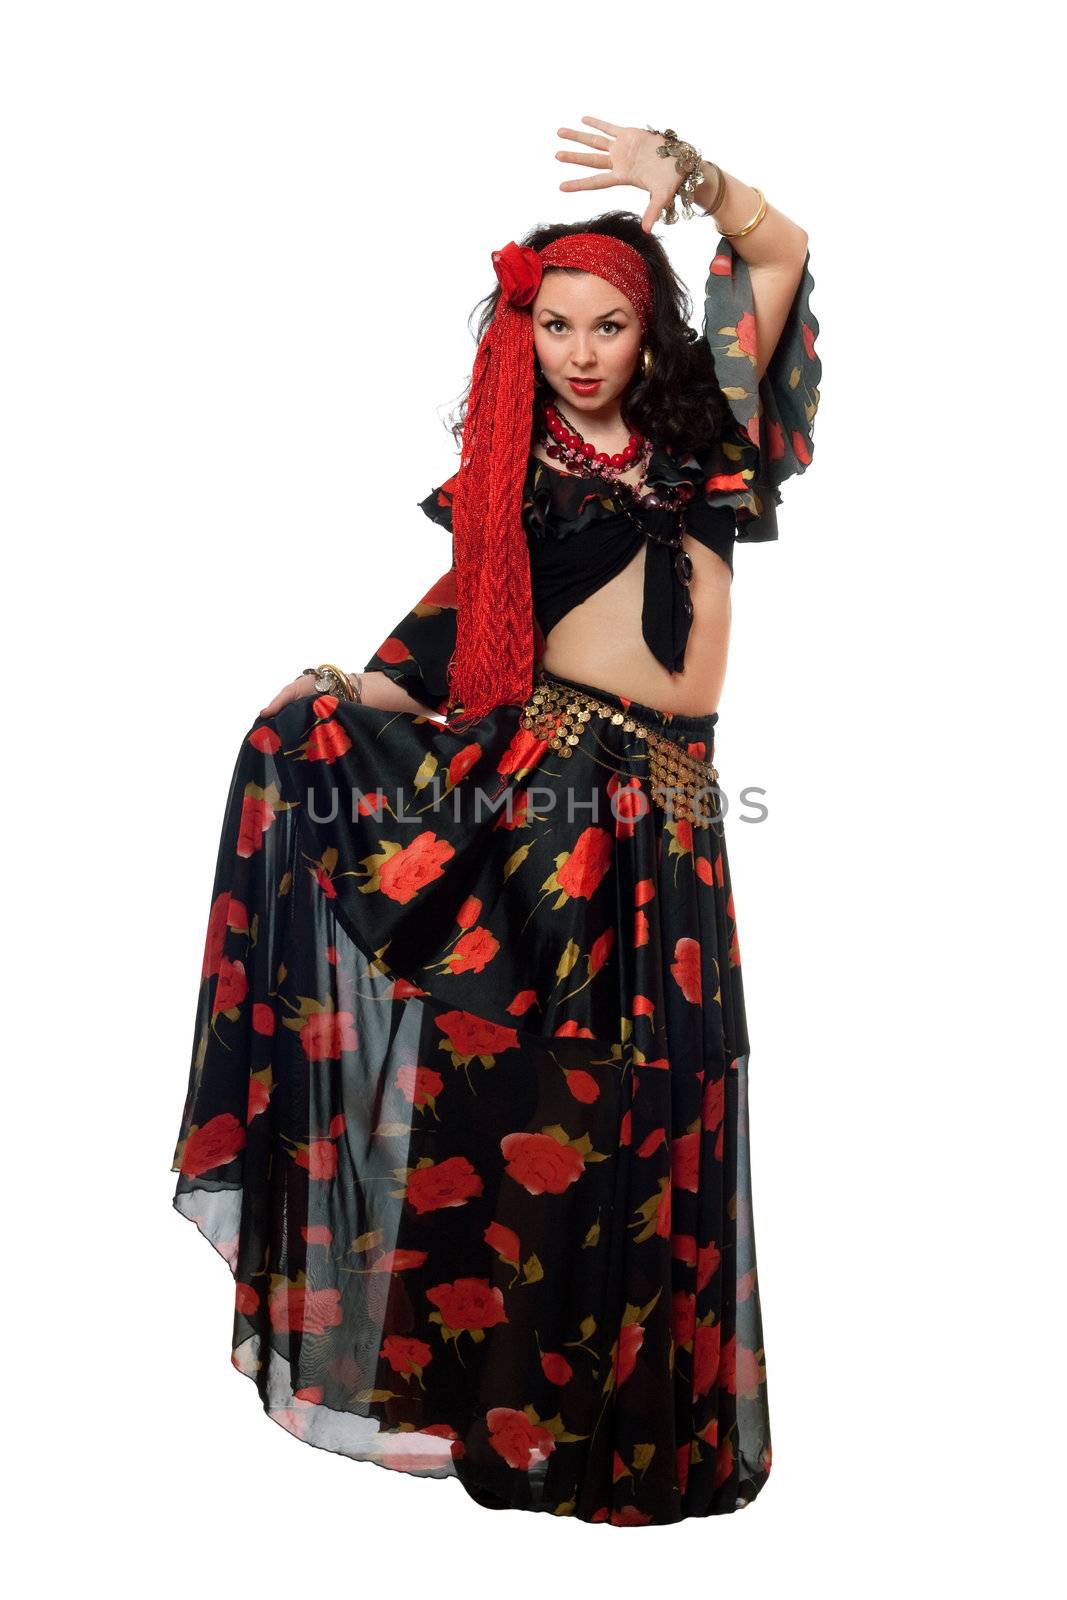 Dancing gypsy woman in a black skirt. Isolated